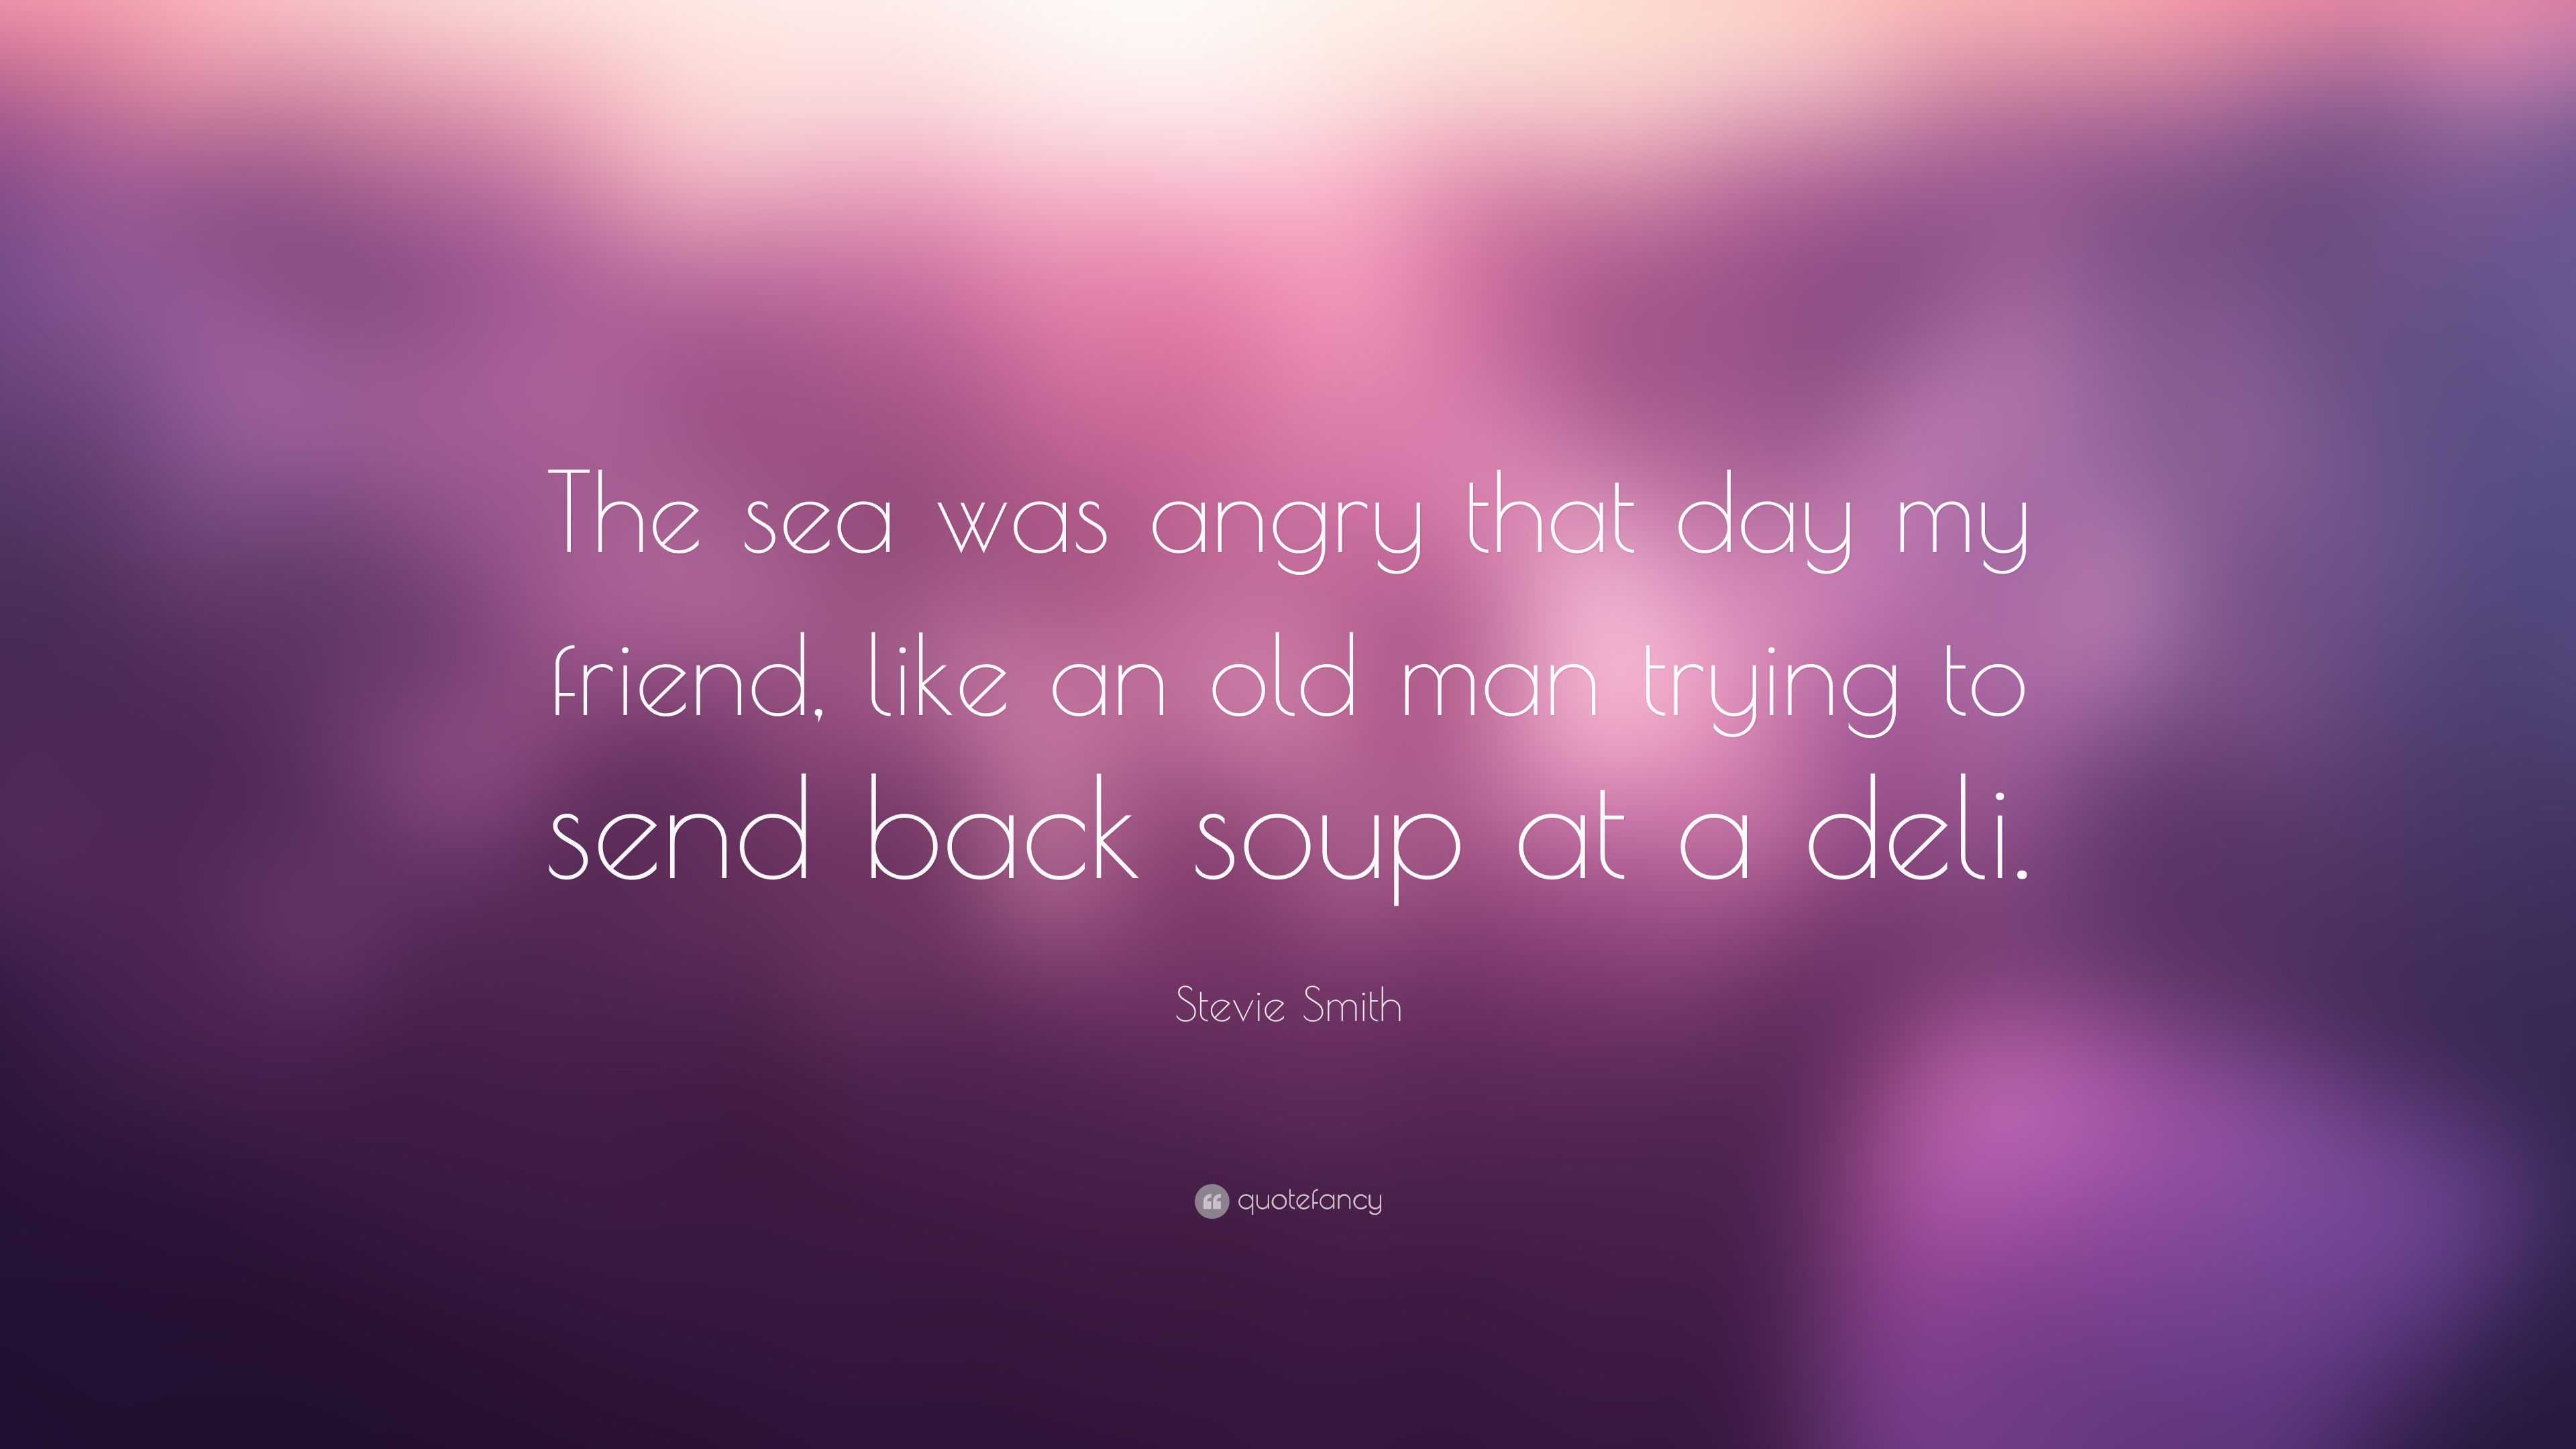 Stevie Smith Quote The Sea Was Angry That Day My Friend Like An Old Man Trying